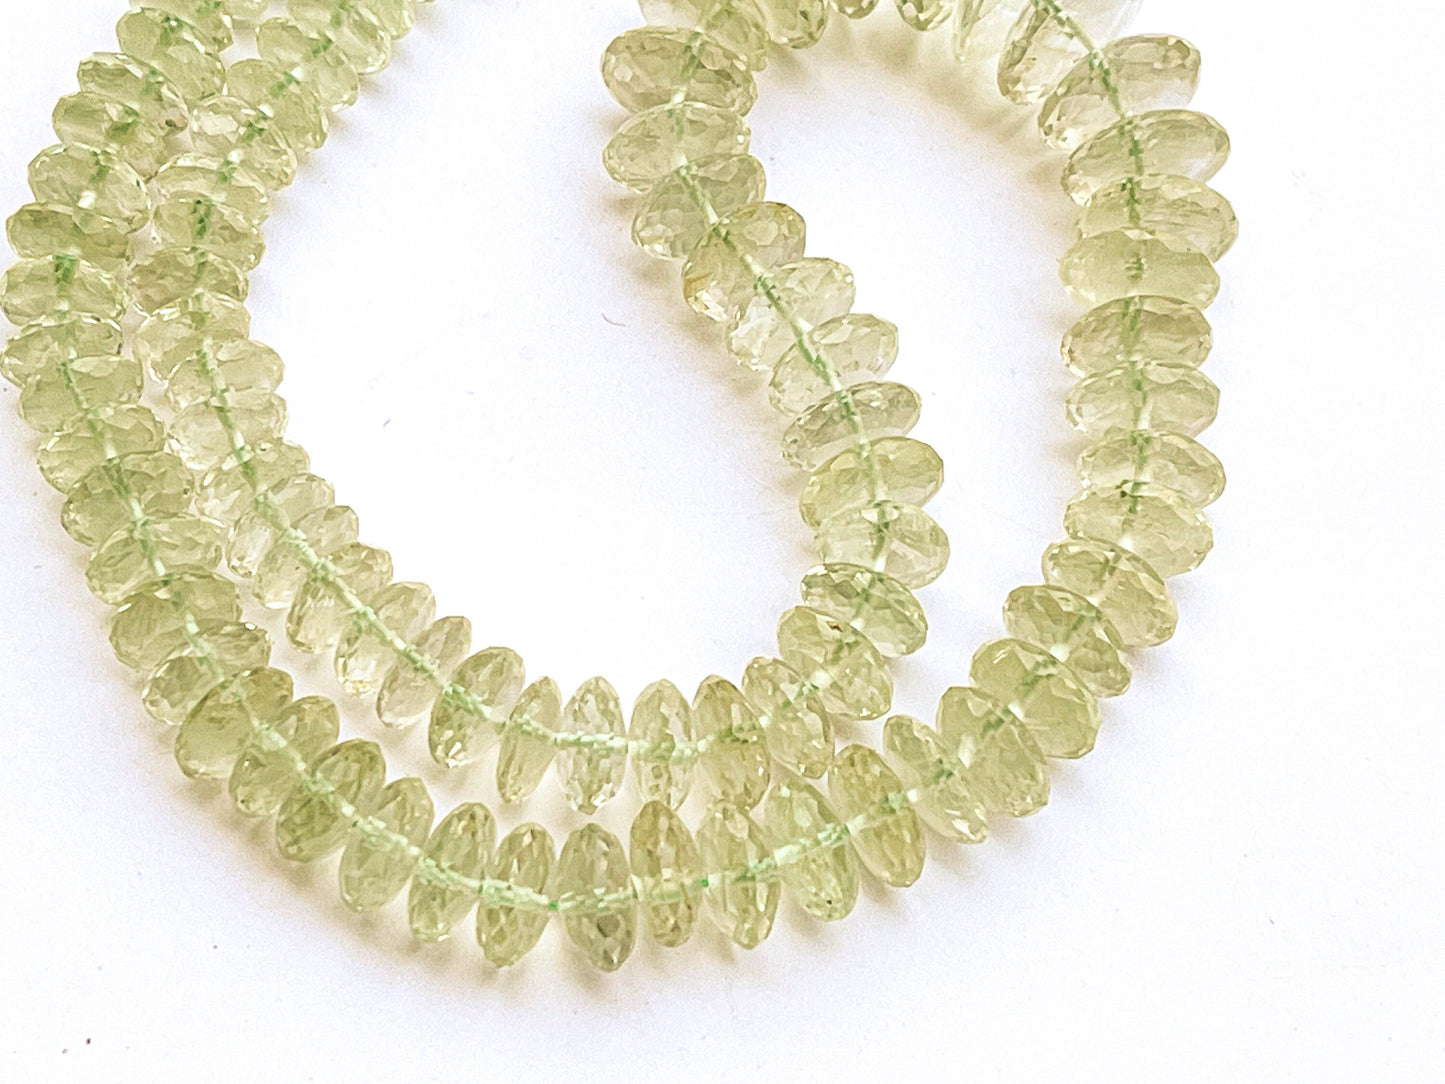 Green Amethyst Micro Faceted Rondelle Shape German cut beads